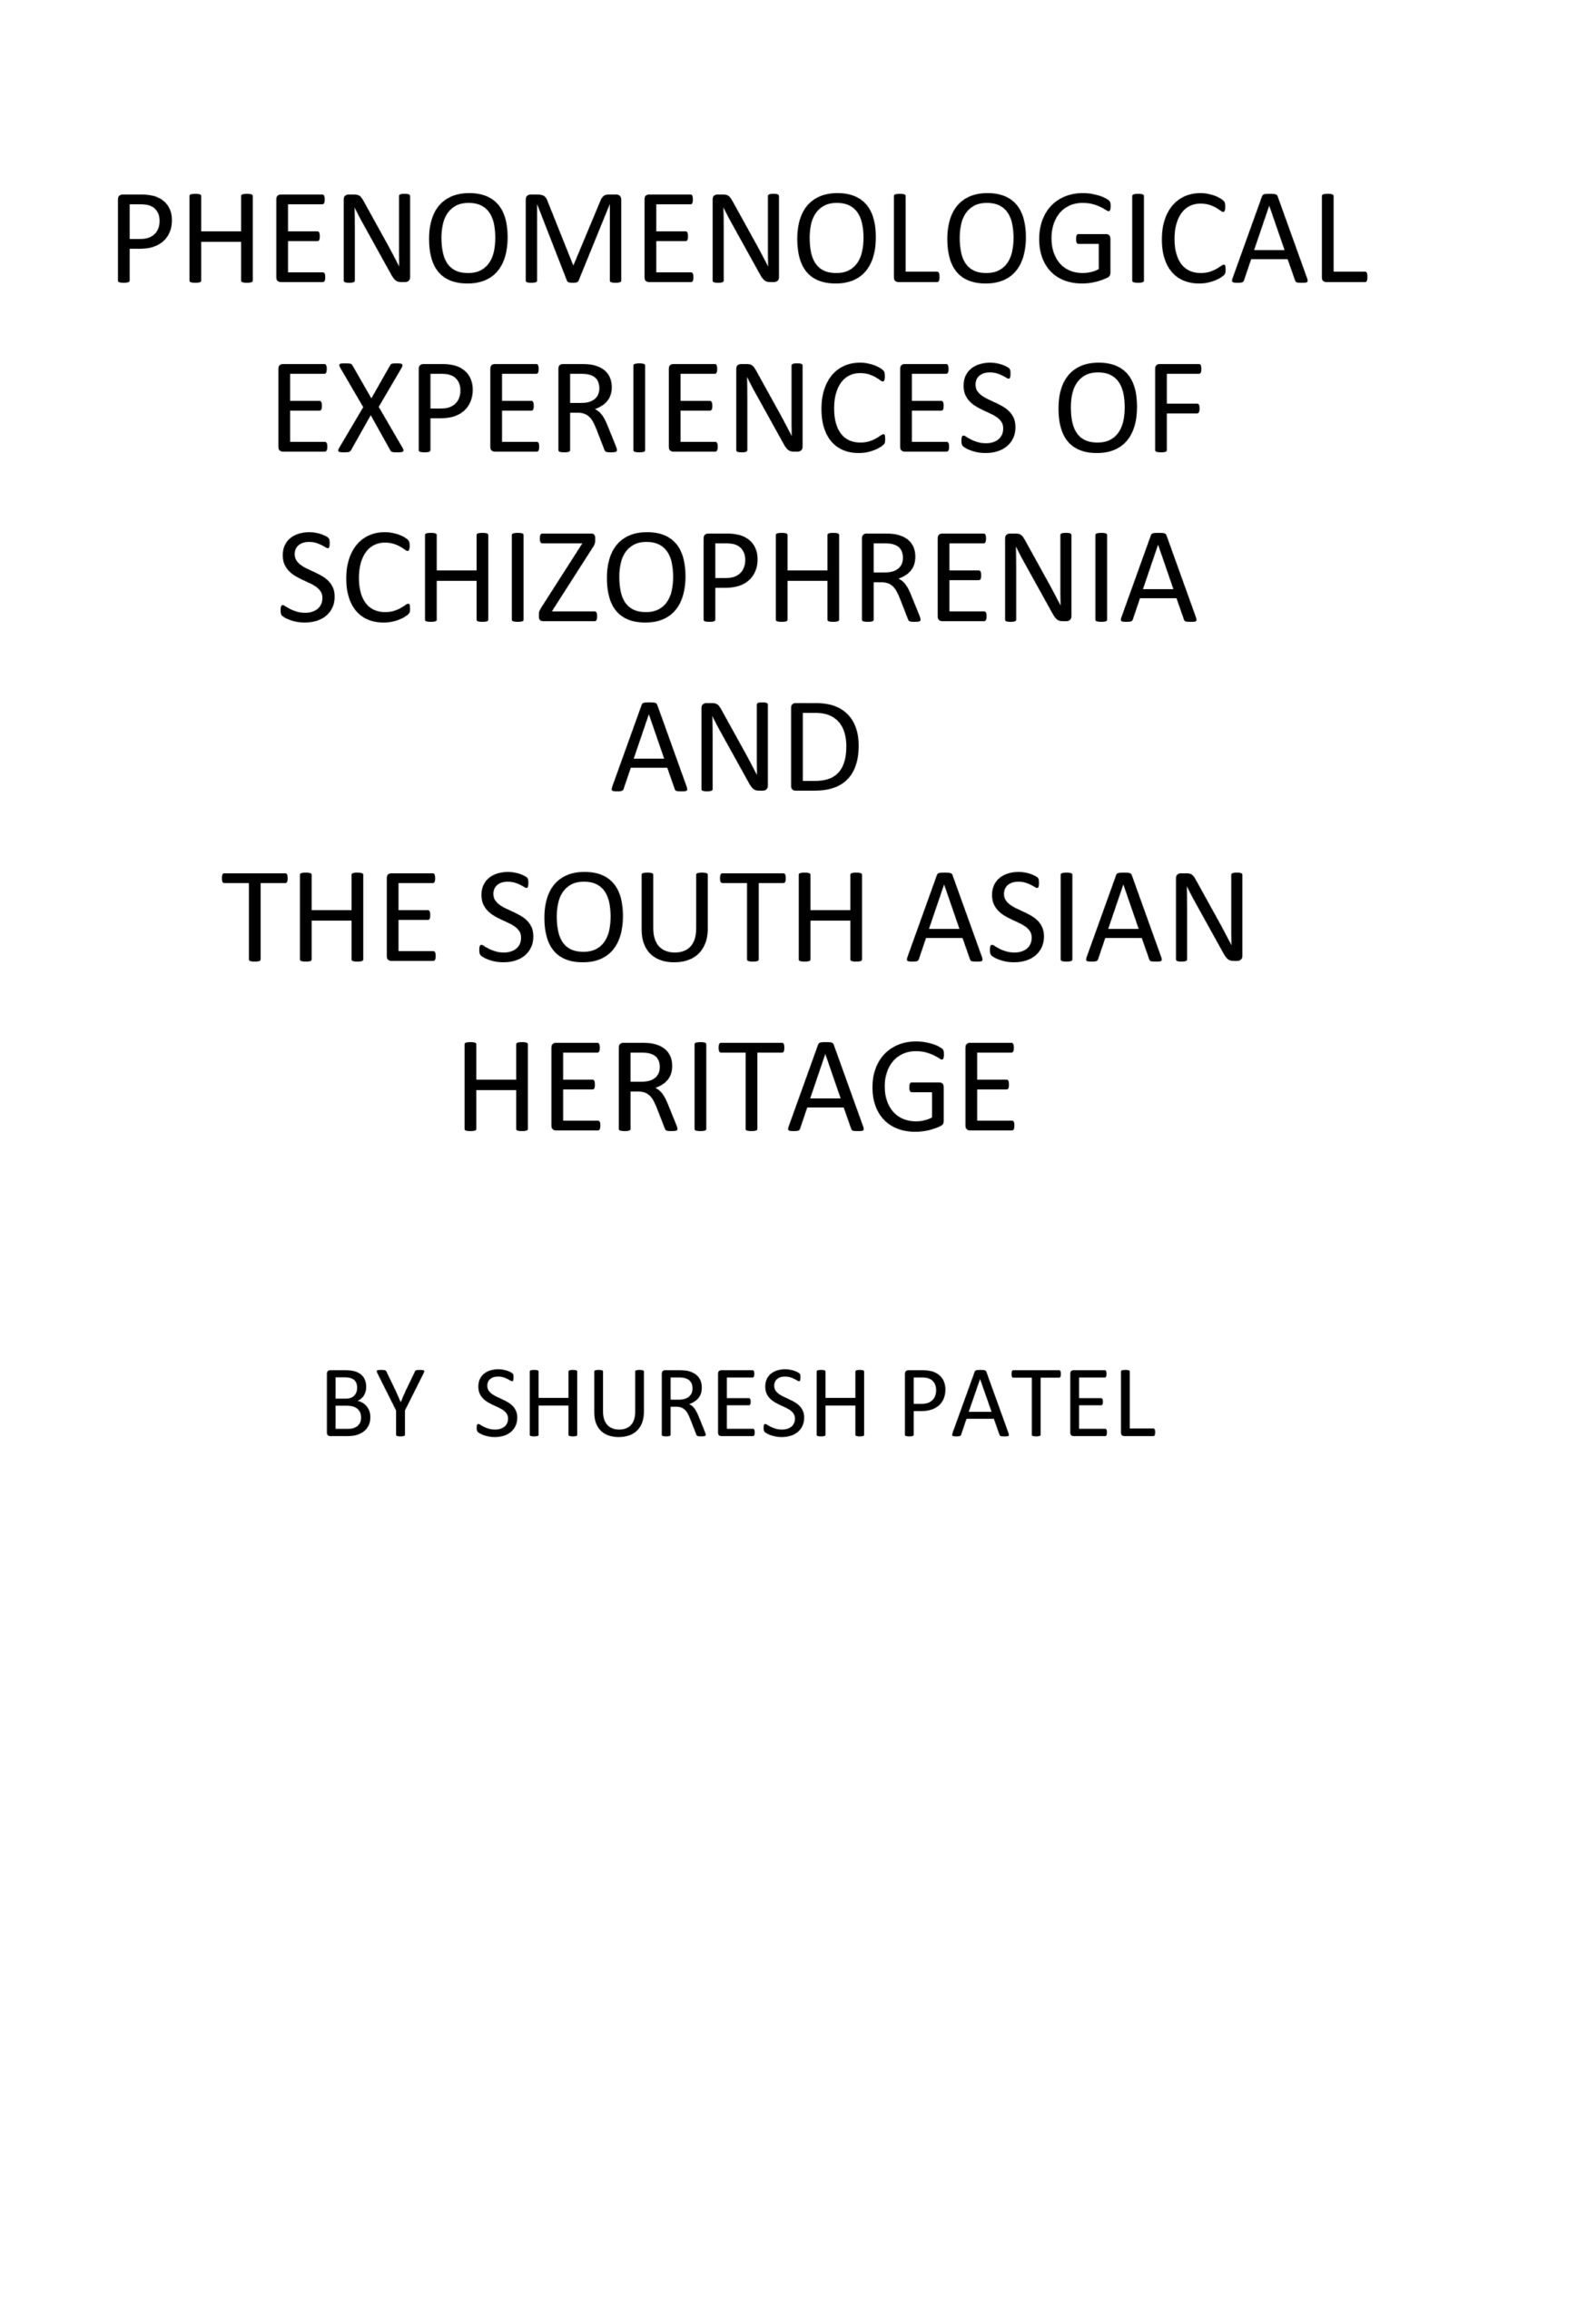 PHENOMENOLOGICAL EXPERIENCES OF SCHIZOPHRENIA AND THE SOUTH ASIA